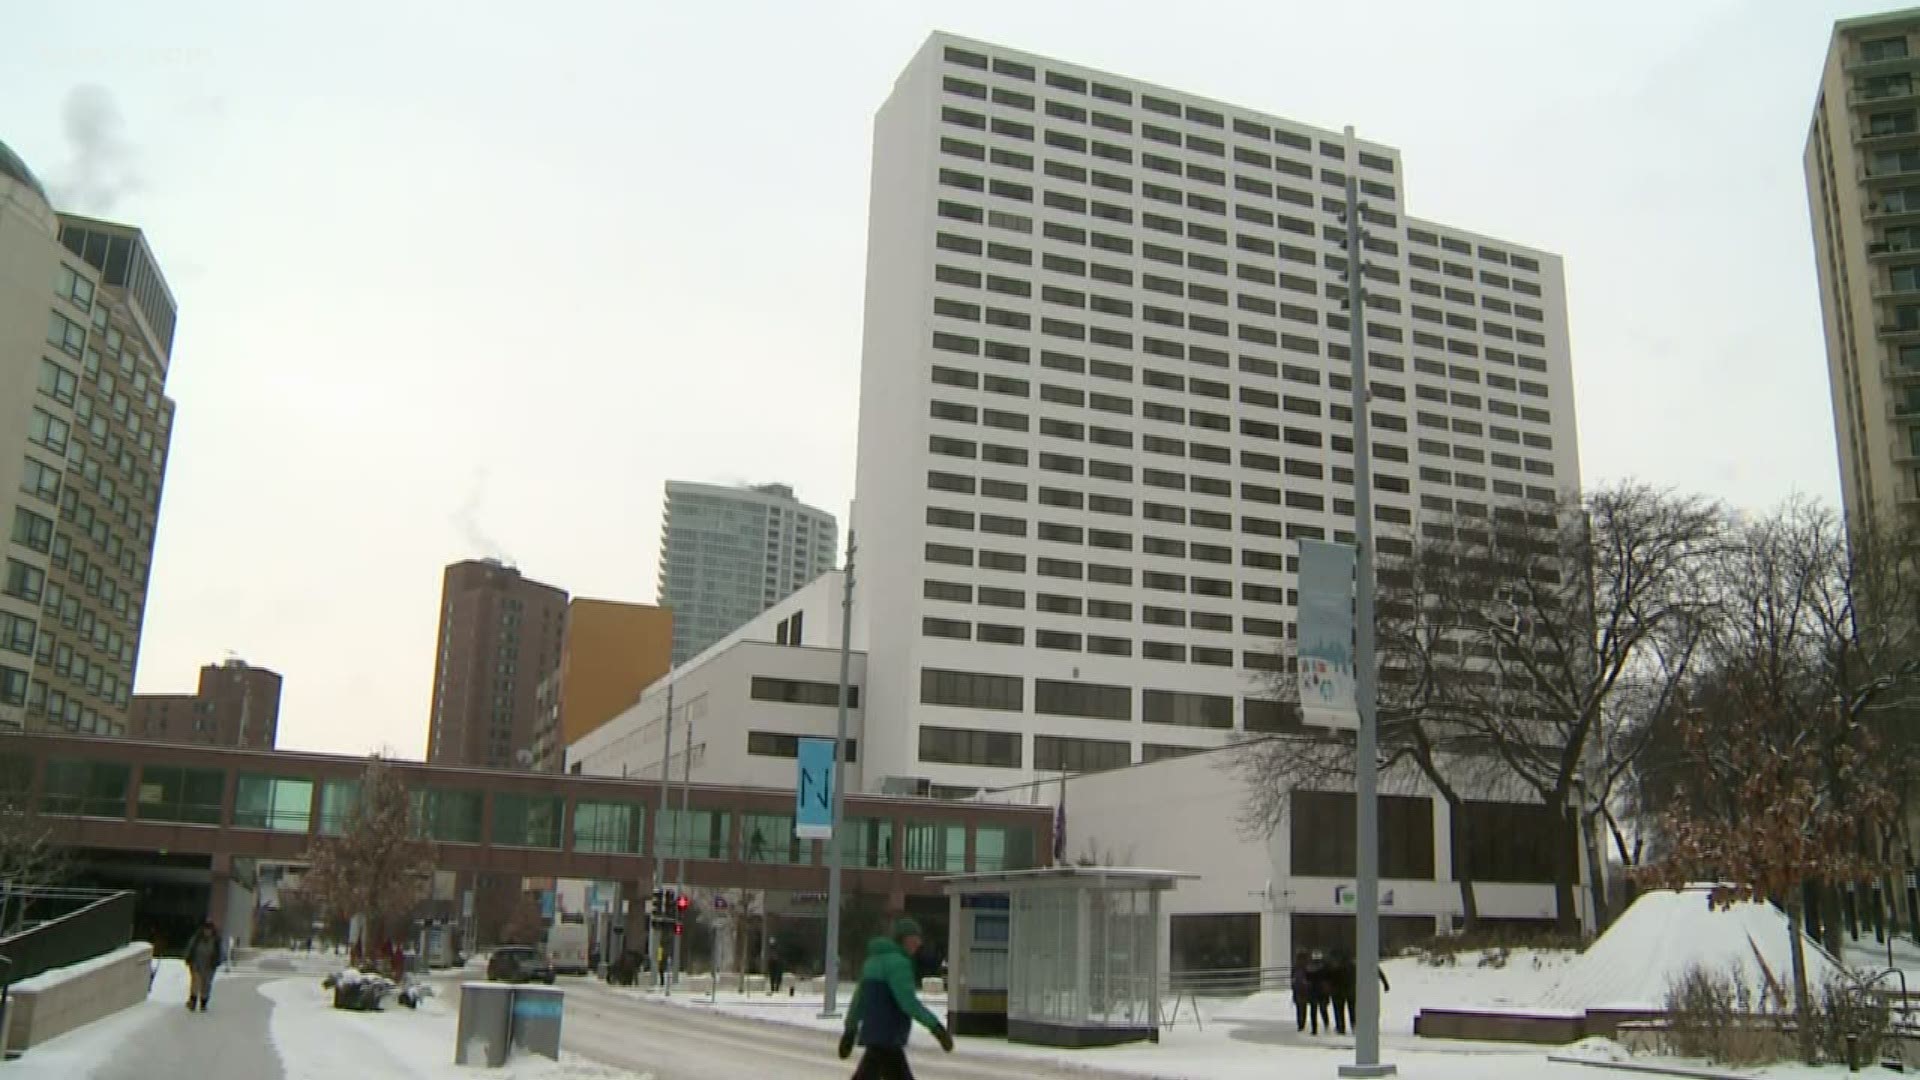 Police say they are investigating reports of some "electronic devices" found in guest rooms at the Minneapolis Hyatt Regency.